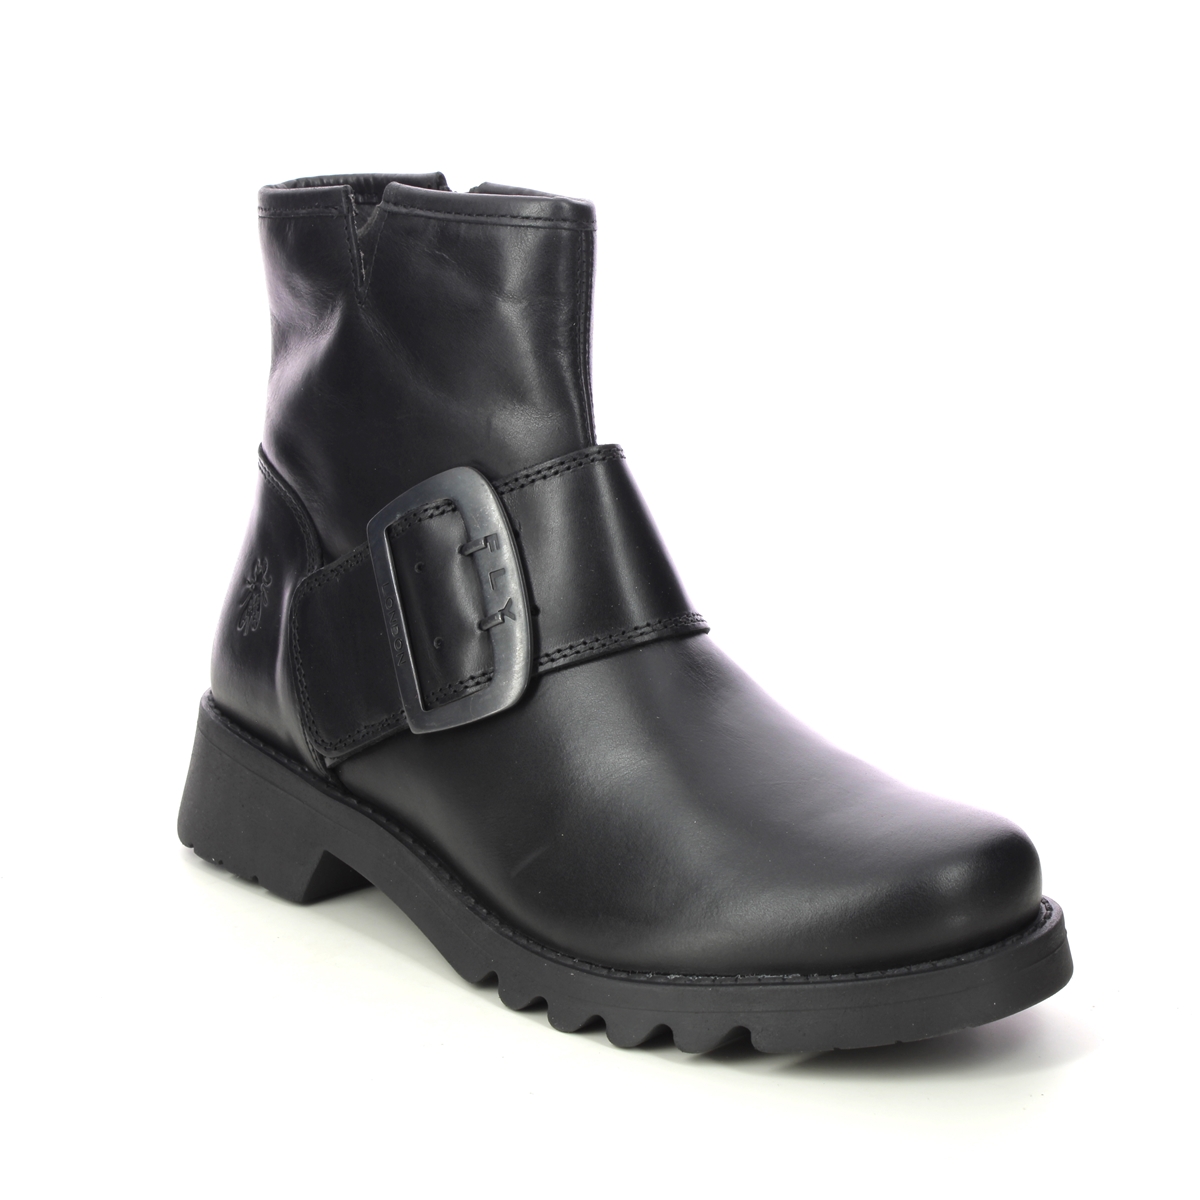 Fly London Rily   Ronin Black Leather Womens Ankle Boots P144991 In Size 38 In Plain Black Leather